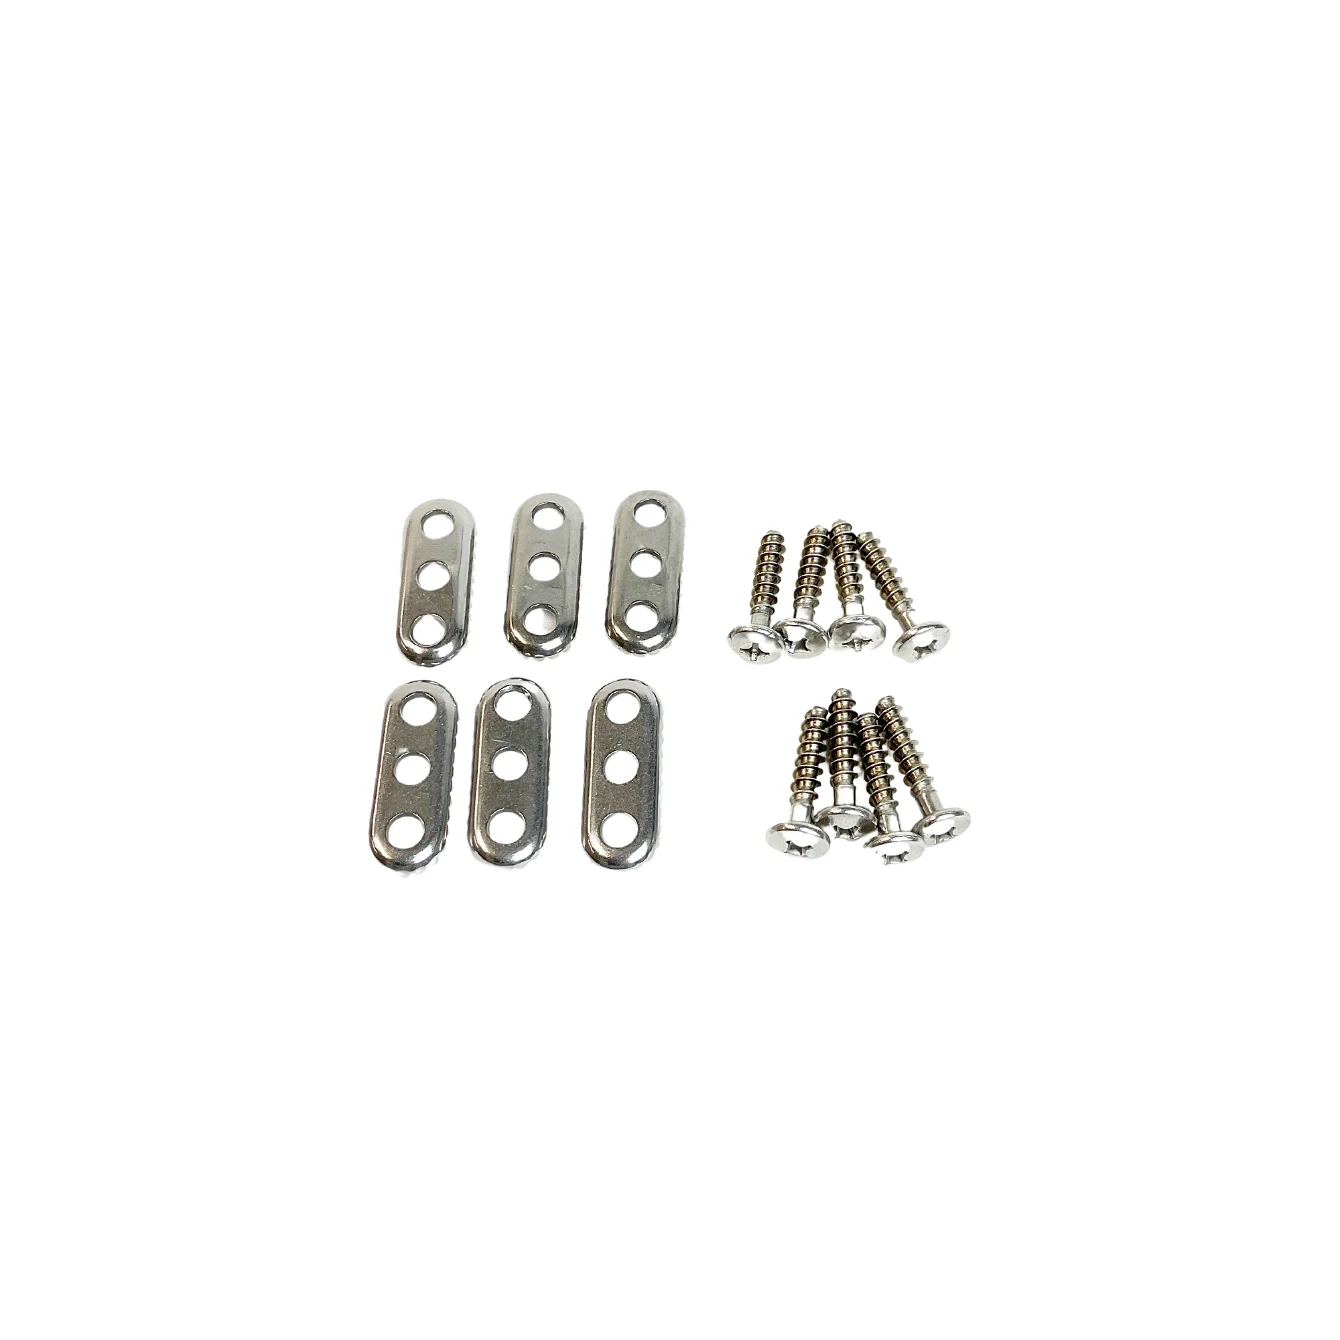 Duotone Screw Set incl. Washer for Footstraps